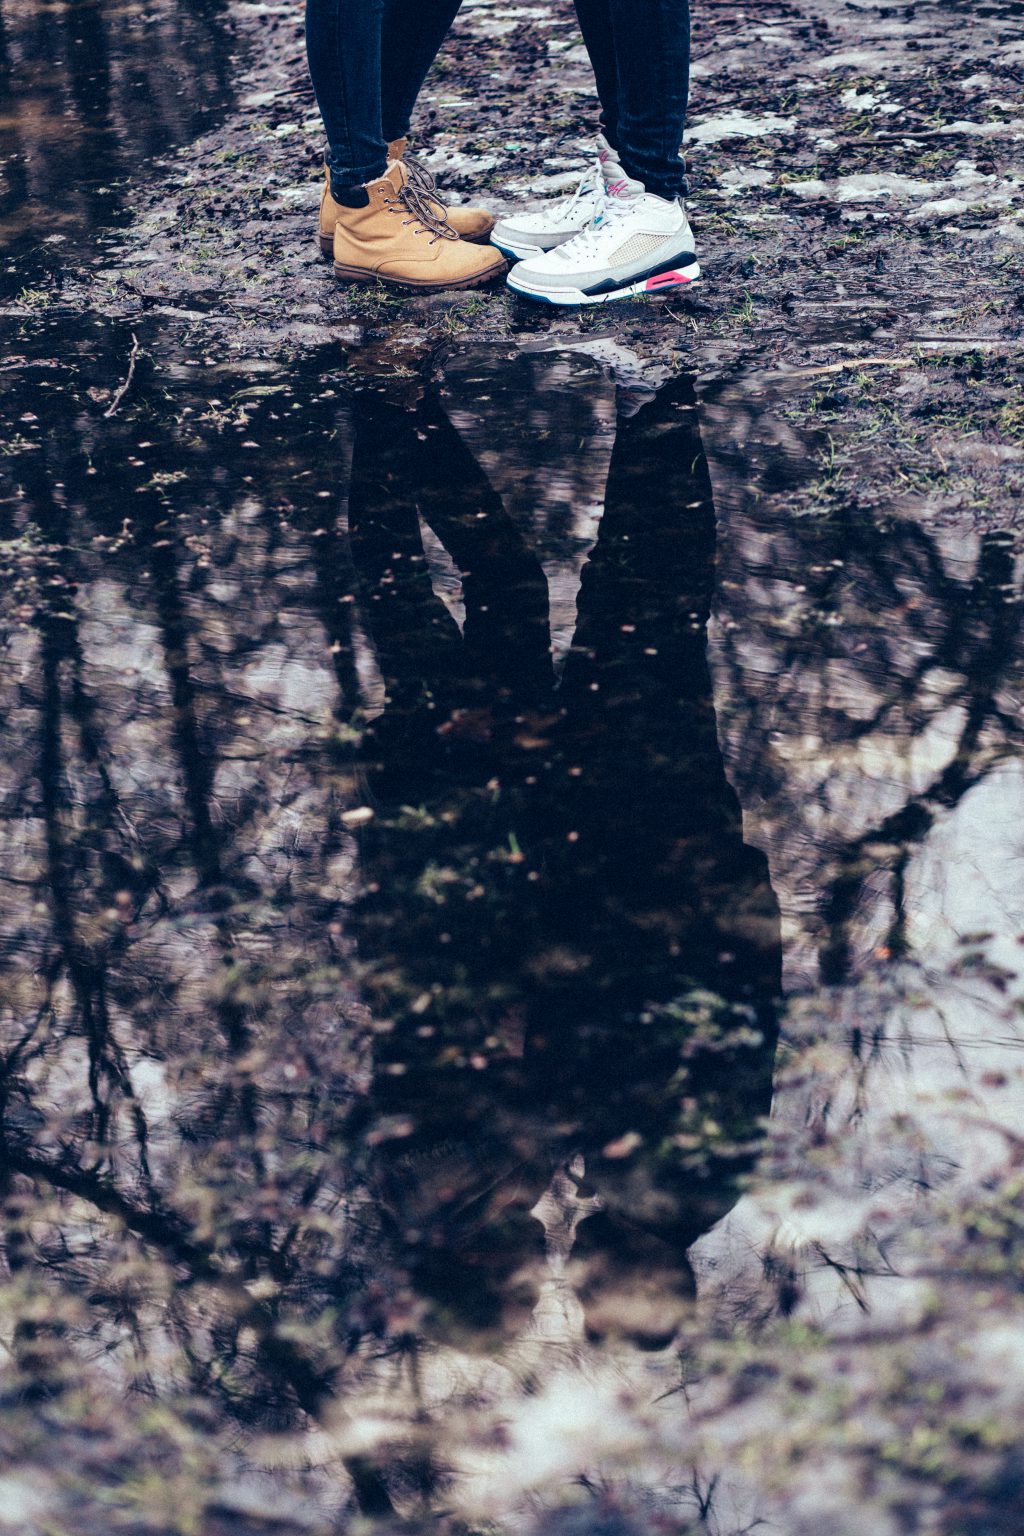 A couple reflection in a puddle - free stock photo